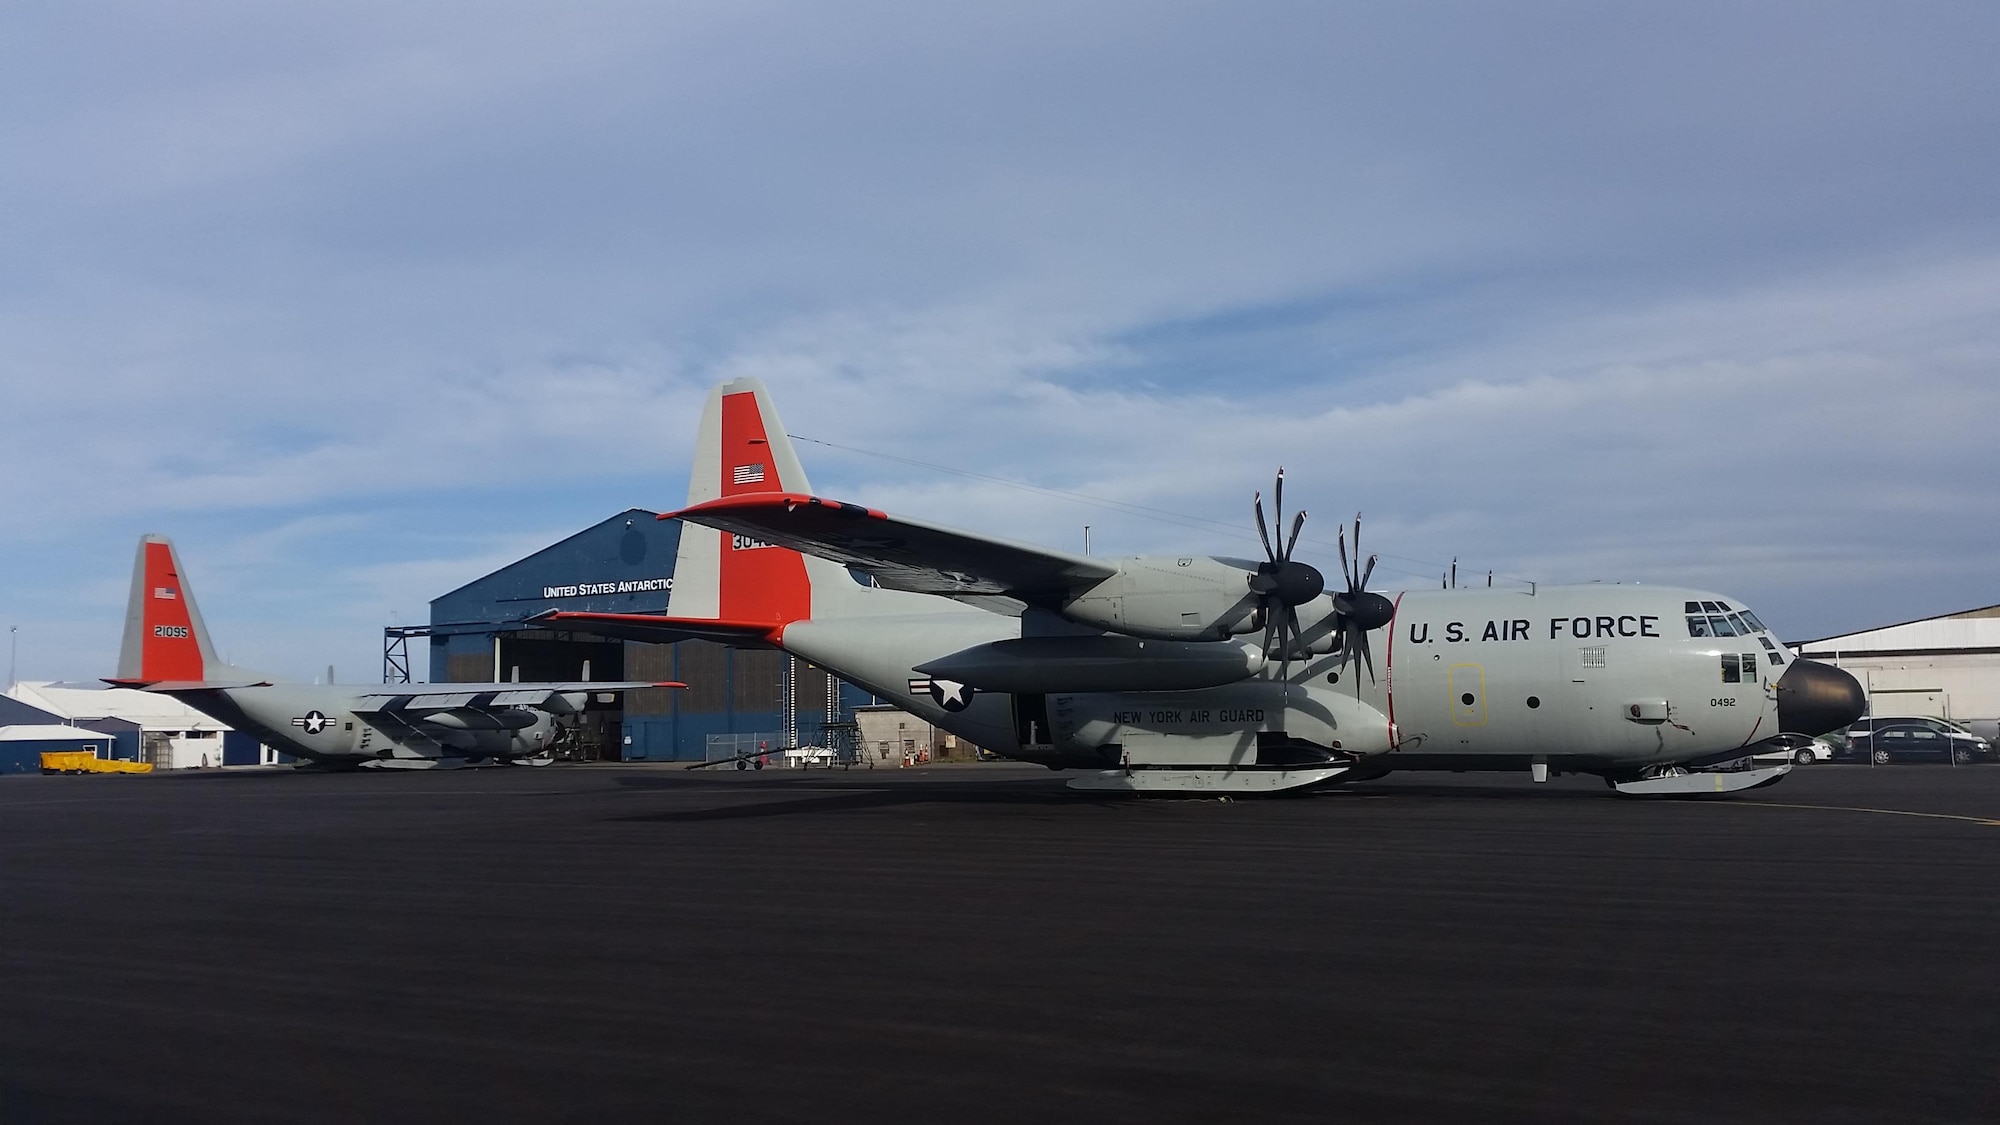 A U.S. Air Force LC-130 Hercules from the 109th Airlift Wing with the New York Air National Guard, sits on the ramp at Christchurch, New Zealand, Jan. 13, 2016, during Operation DEEP FREEZE, the Department of Defense's support of the U.S. Antarctic Program and the National Science Foundation. This year marked the 60th Anniversary of the operation. (Courtesy photo)